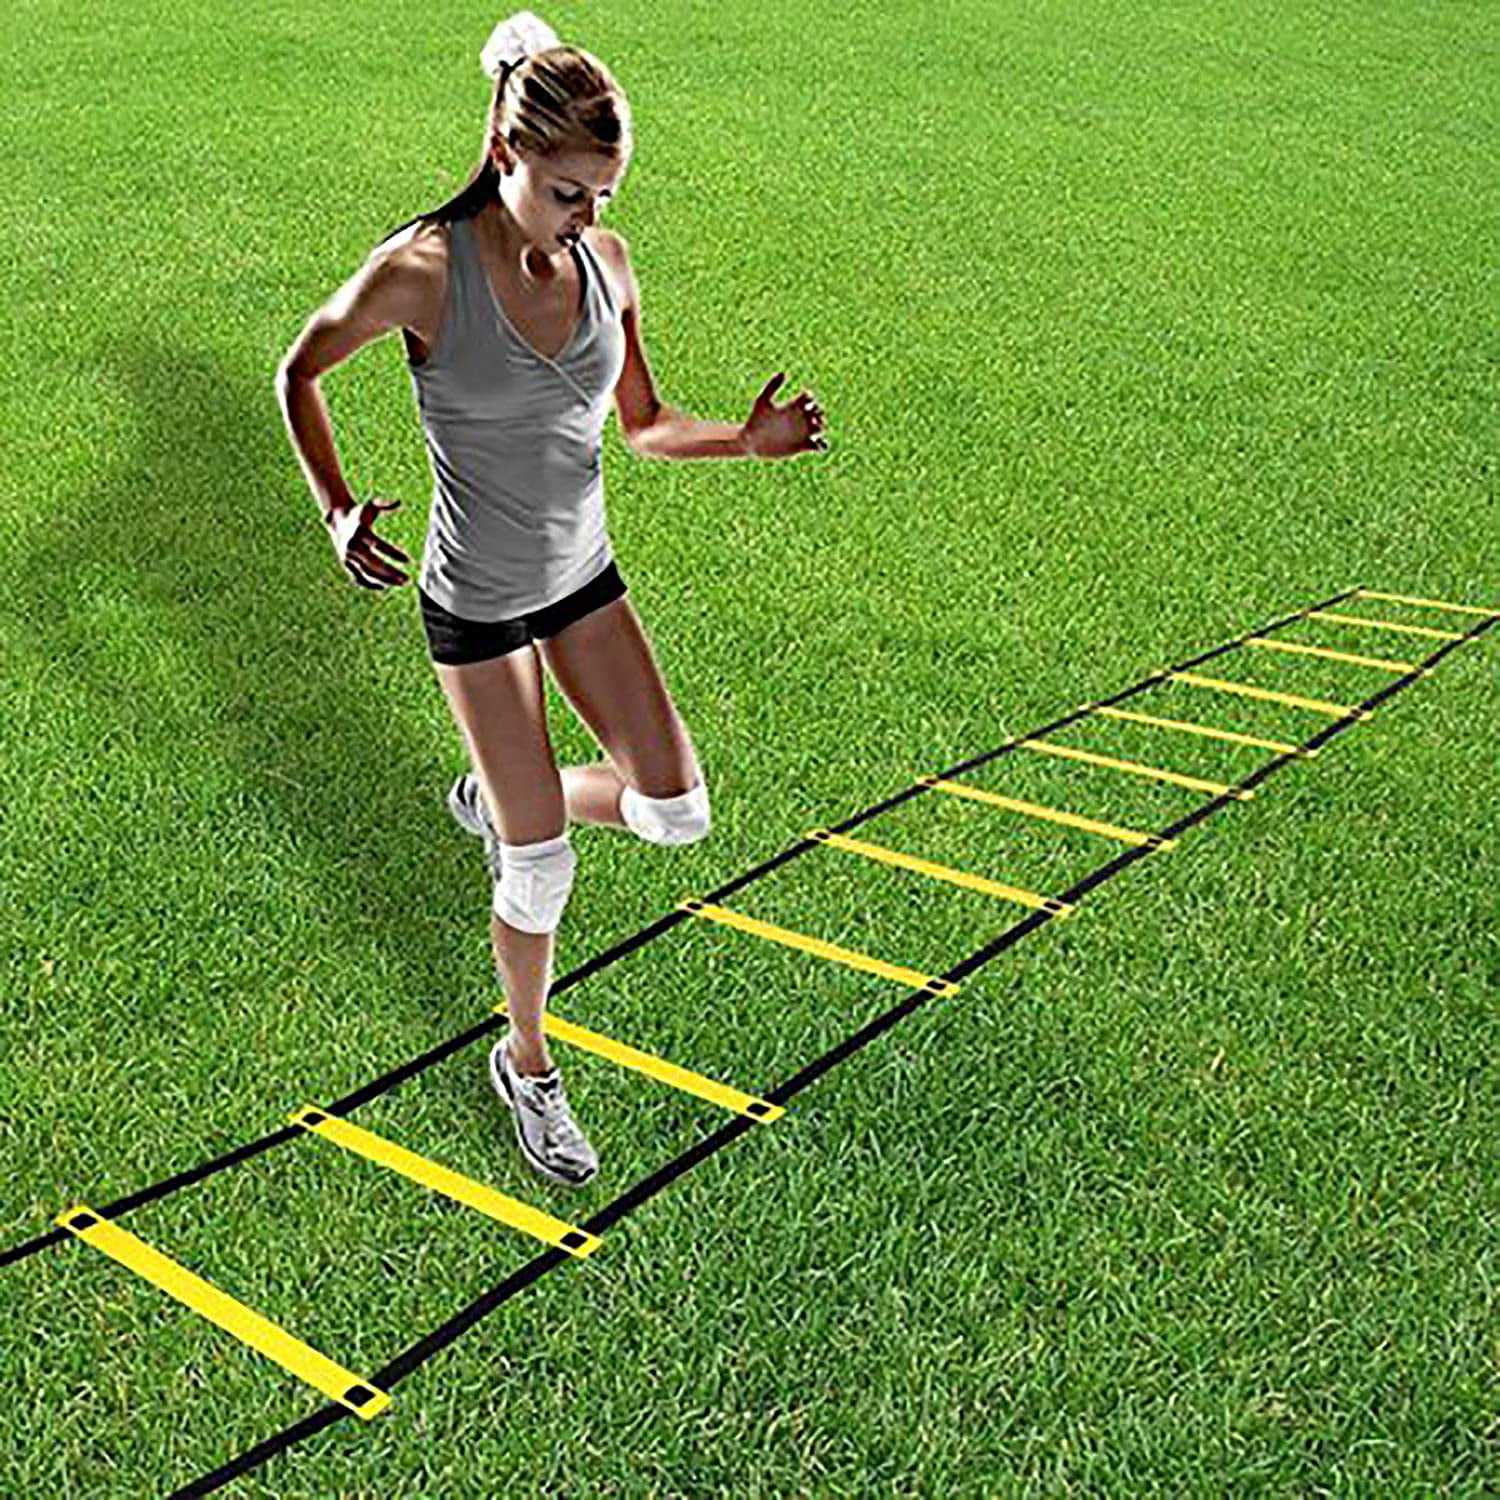 Footwork 4m Soccer Ball Football Flexibility Speed Training Fitness Jumping Ladder with Carrying Bag- for Speed Explosiveness Coordination Estink Football Training Ladder Sport Training 